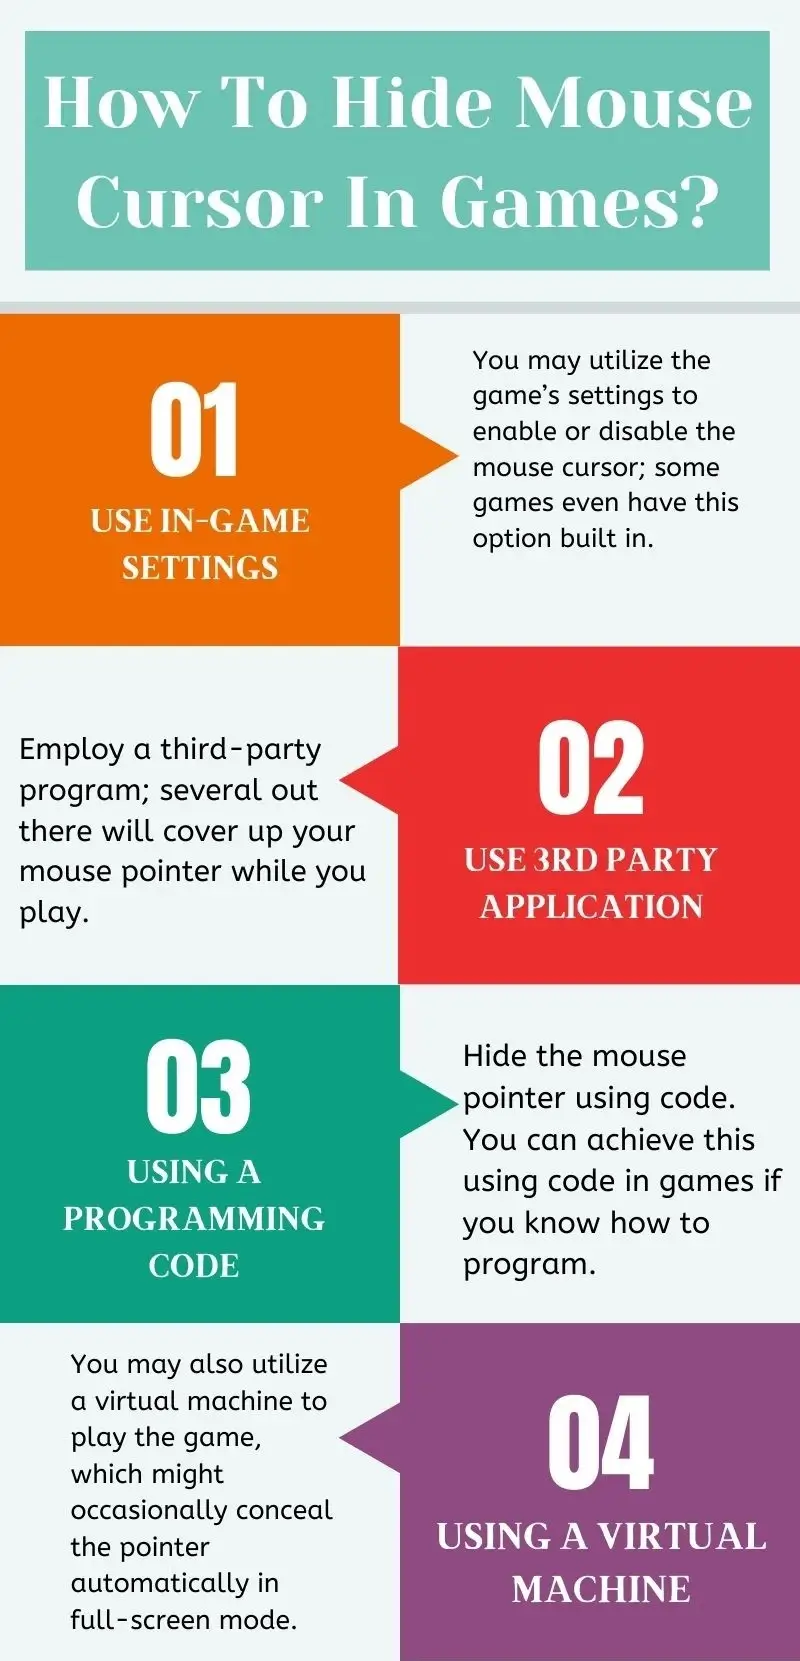 How To Hide Mouse Cursor In Games